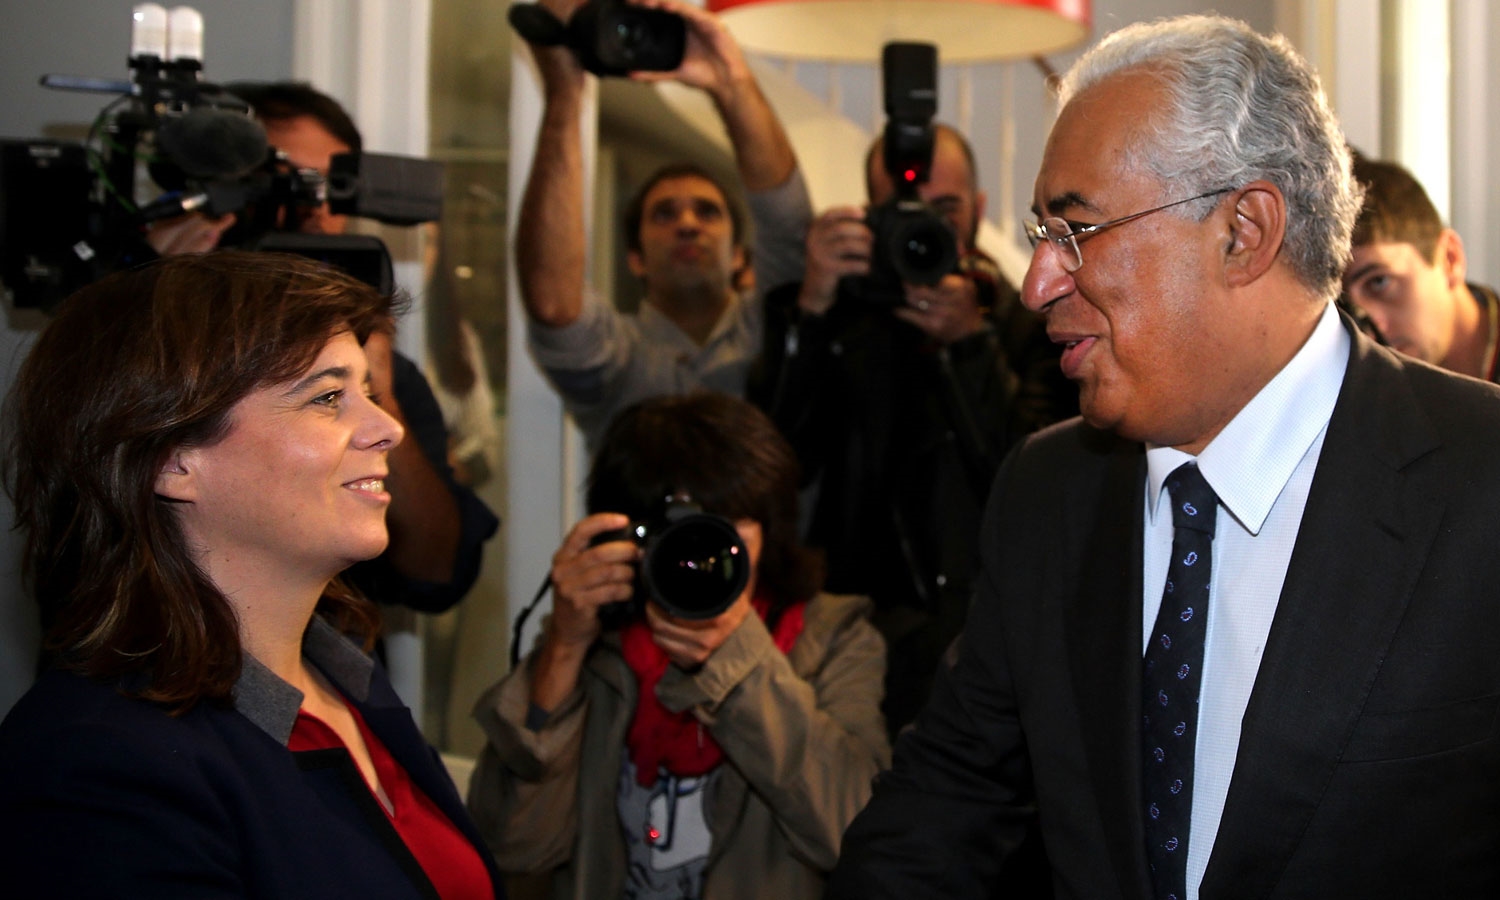 Catarina Martins and prime minister António Costa, leaders of the Portuguese radical left party Bloco de Esquerda and the social democratic Socialist Party, respectively.